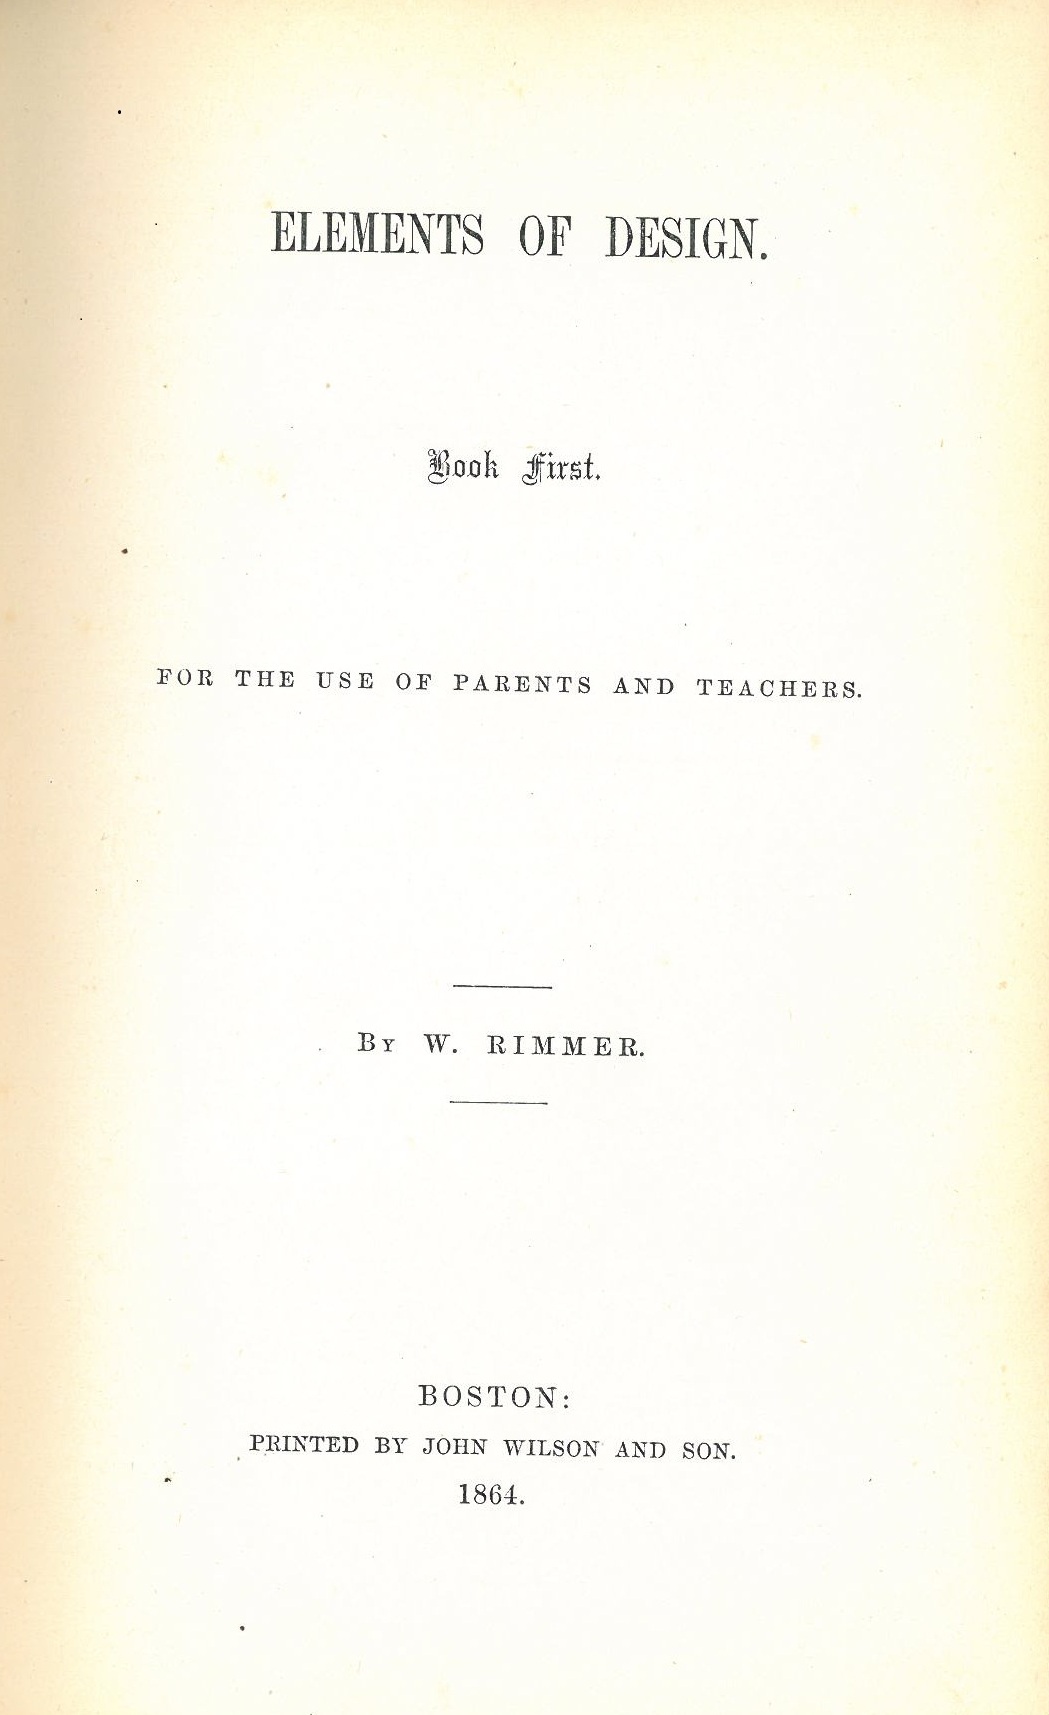 Title page from Elements of Design by William Rimmer (Boston: S.R. Urbino, 1894).